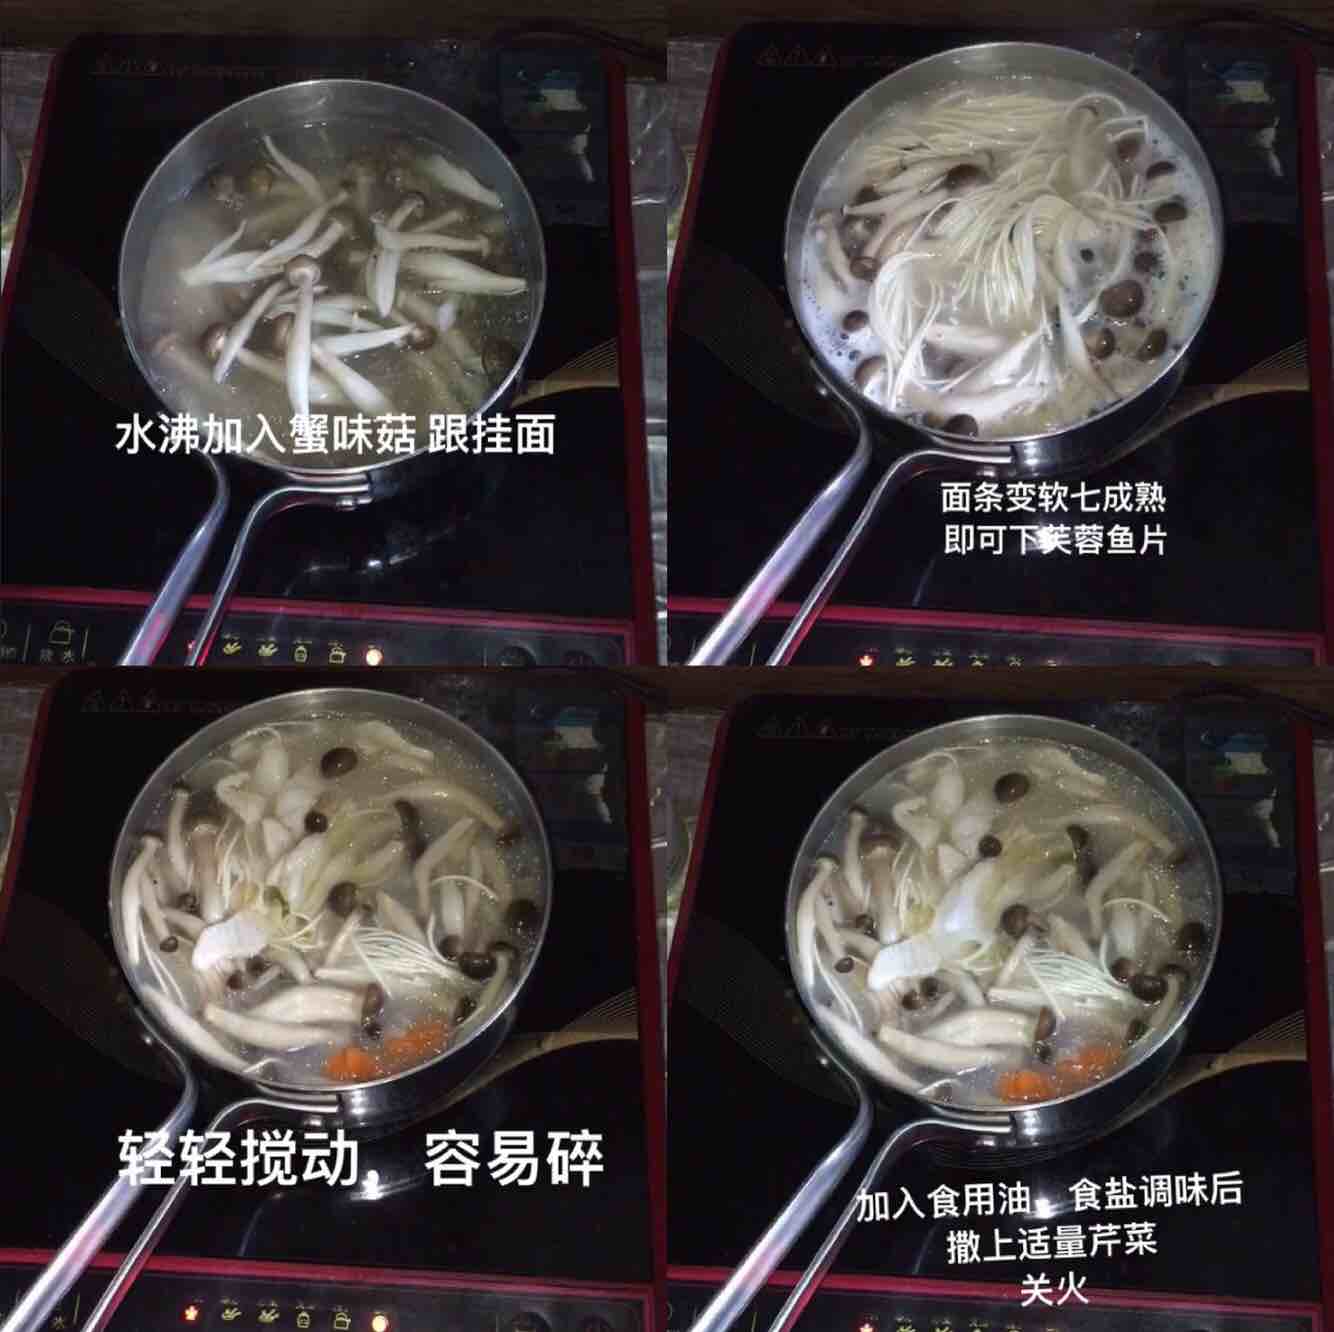 Summer Heat is Light and Good Appetite~~fu Rong Fish Noodles recipe